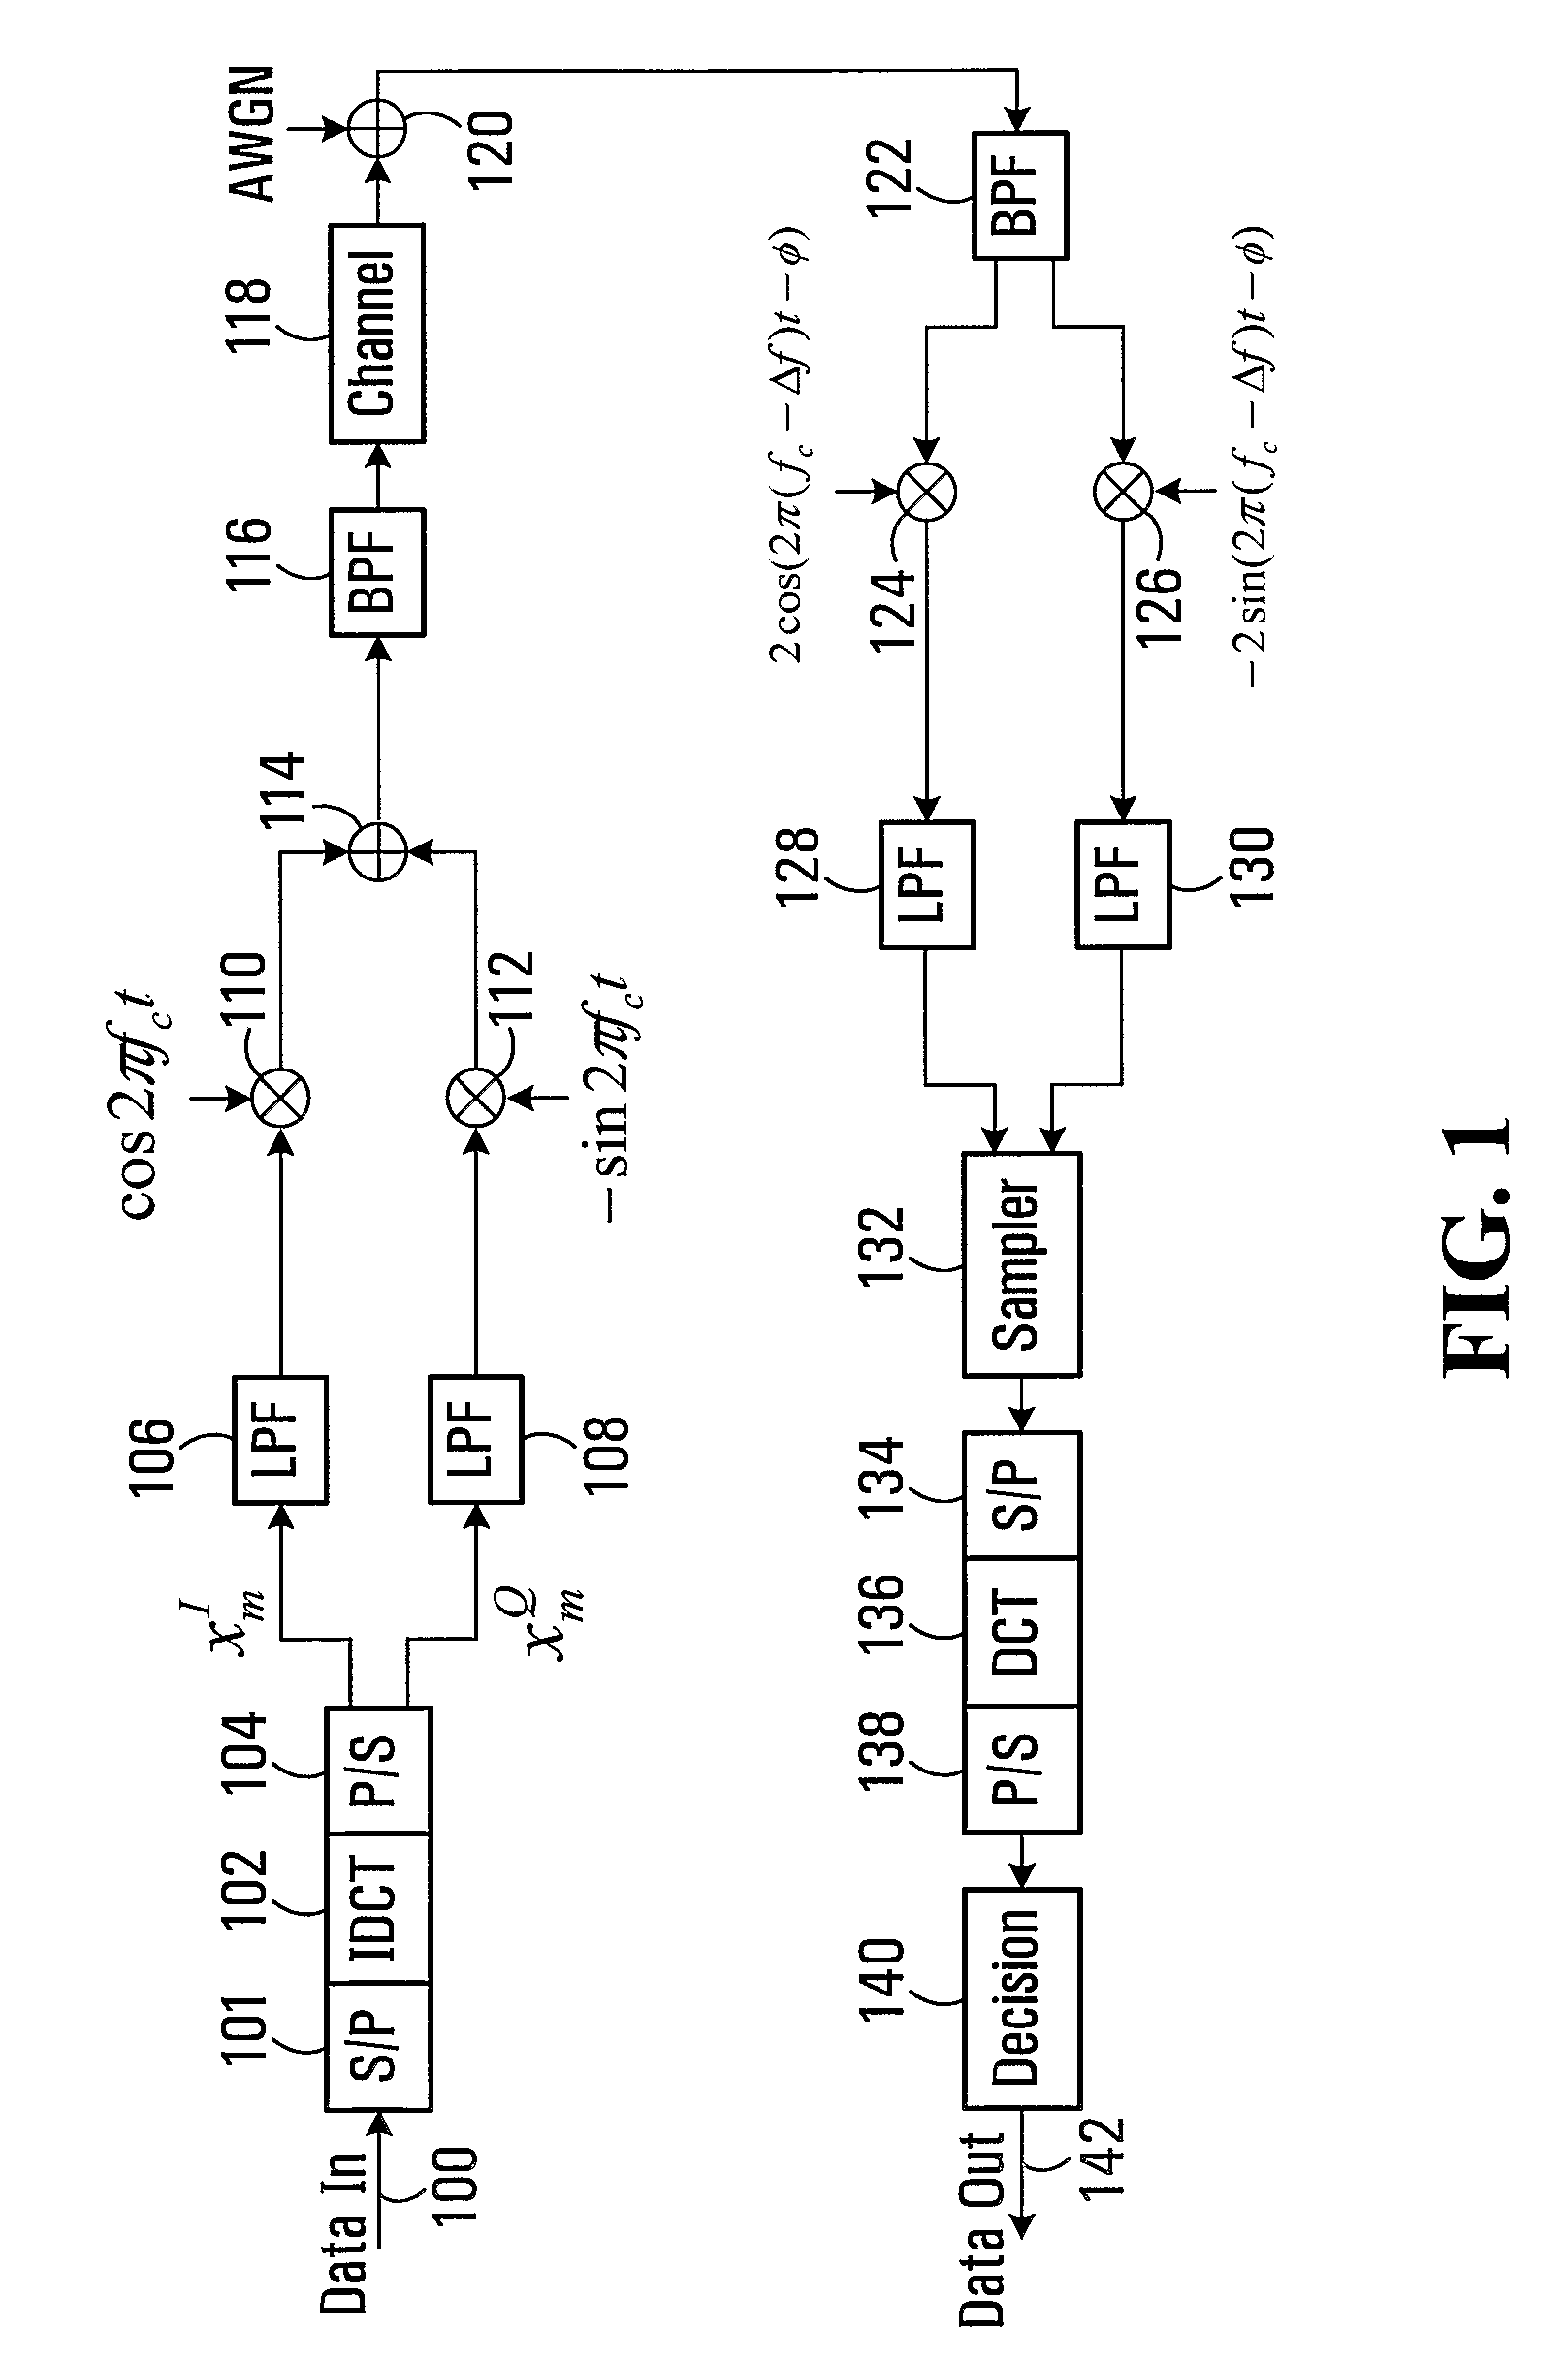 Systems and Methods for Ofdm Transmission and Reception